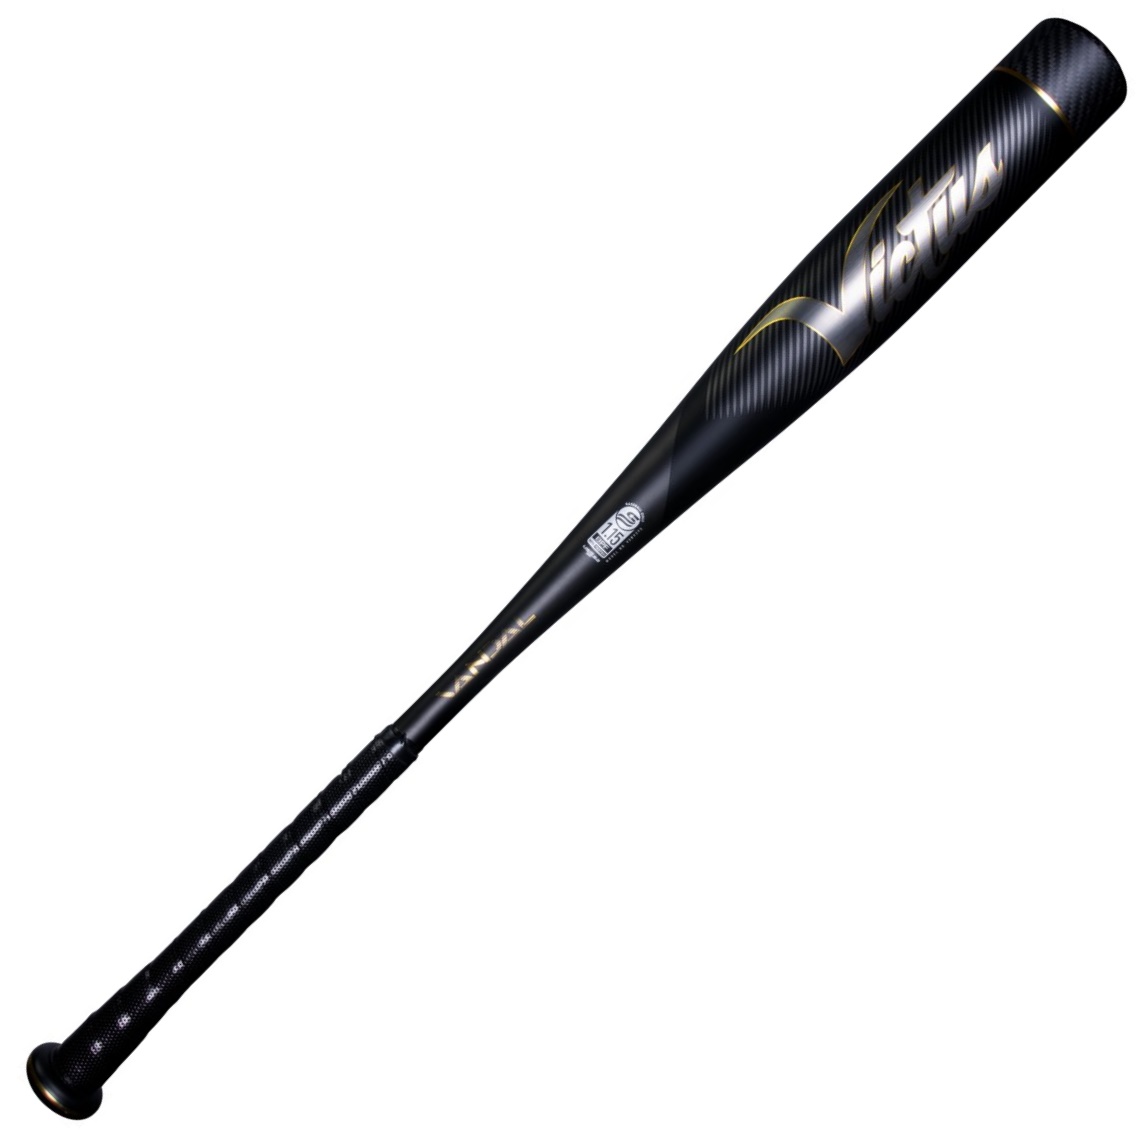  Ringless barrel design made of multi-variable wall thickness Carbon composite barrel end creates an ultra-light swing weight for maximum bat speed One-piece hybrid design engineered and built with the highest grade alloy available Pro-tapered handle with micro-perforated touch grip for more top-hand control and an ergonomic fit for comfort 